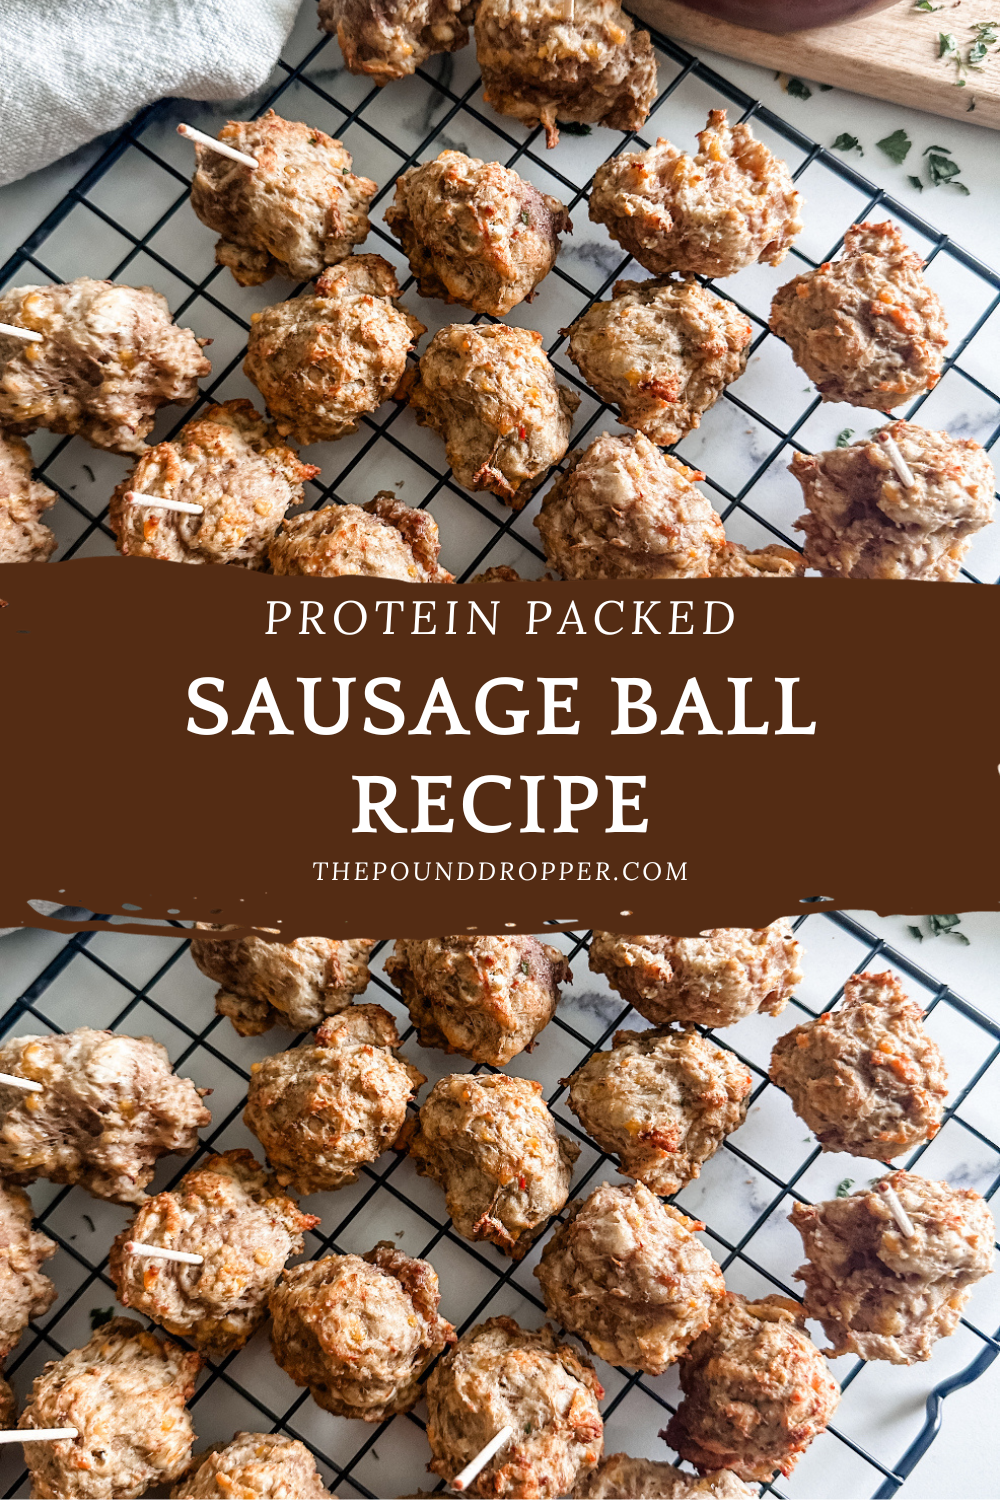 Protein Packed Sausage Balls via @pounddropper